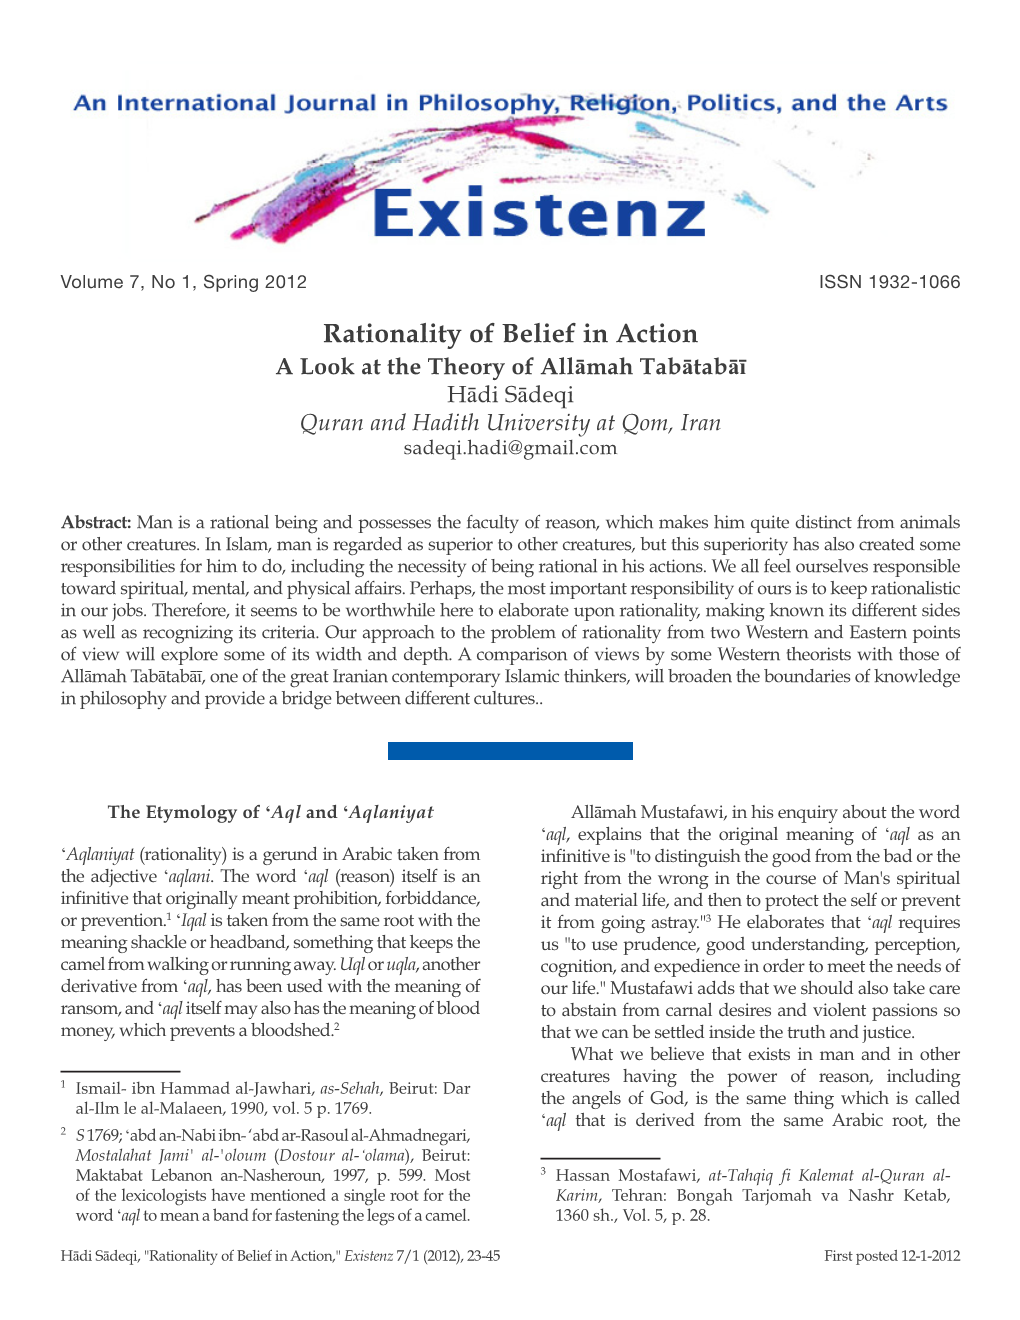 Sādeqi, Rationality of Belief in Action